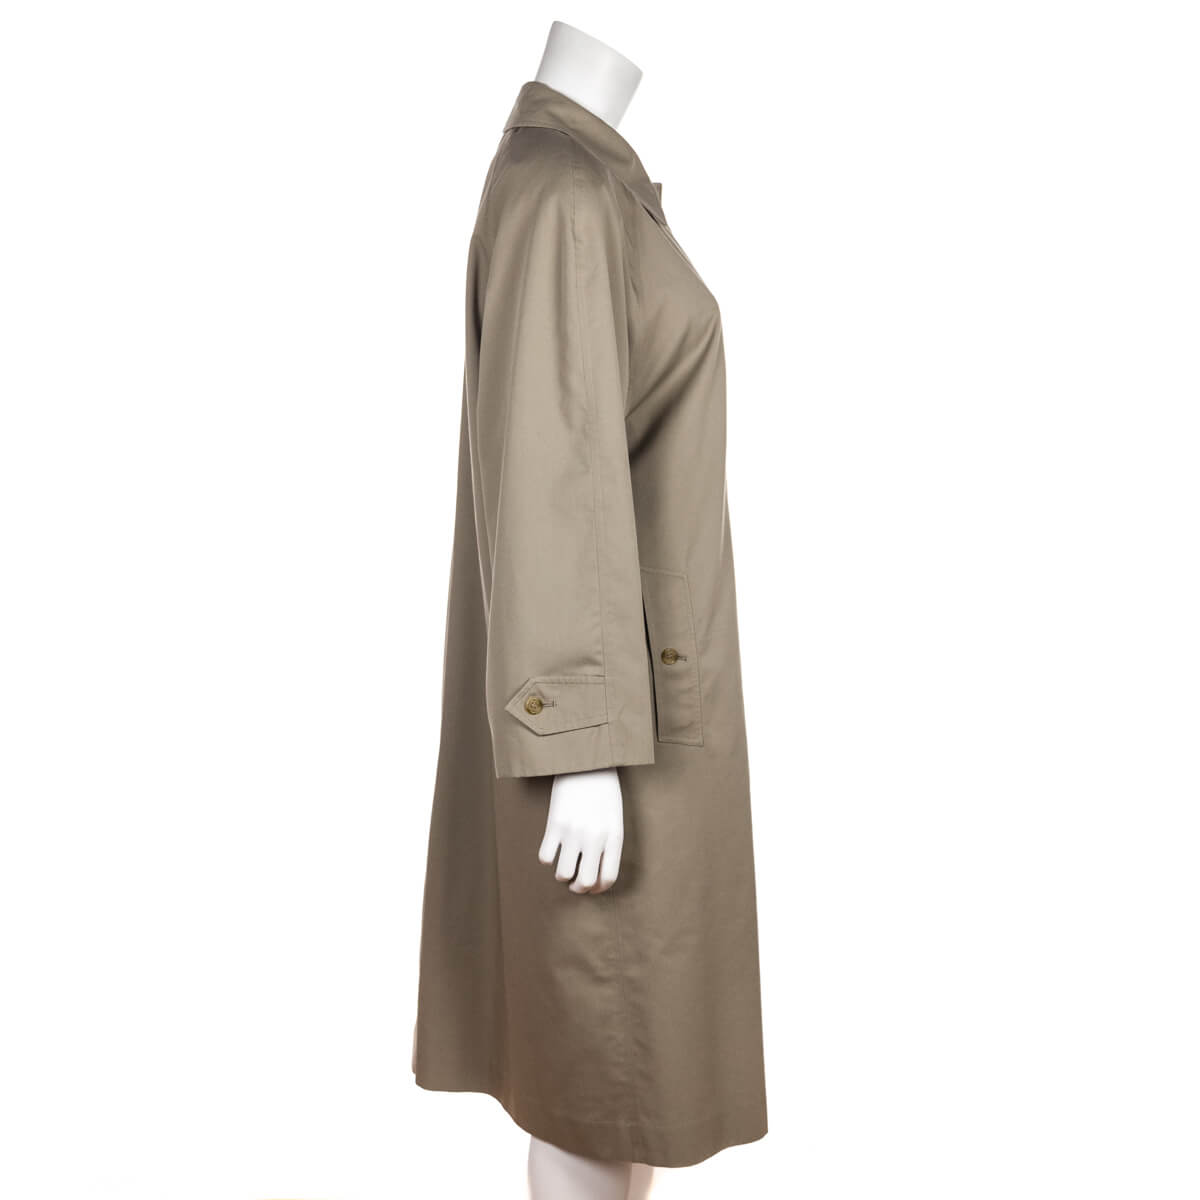 Burberry Beige Single Breasted Trench Coat Size XL - Love that Bag etc - Preowned Authentic Designer Handbags & Preloved Fashions